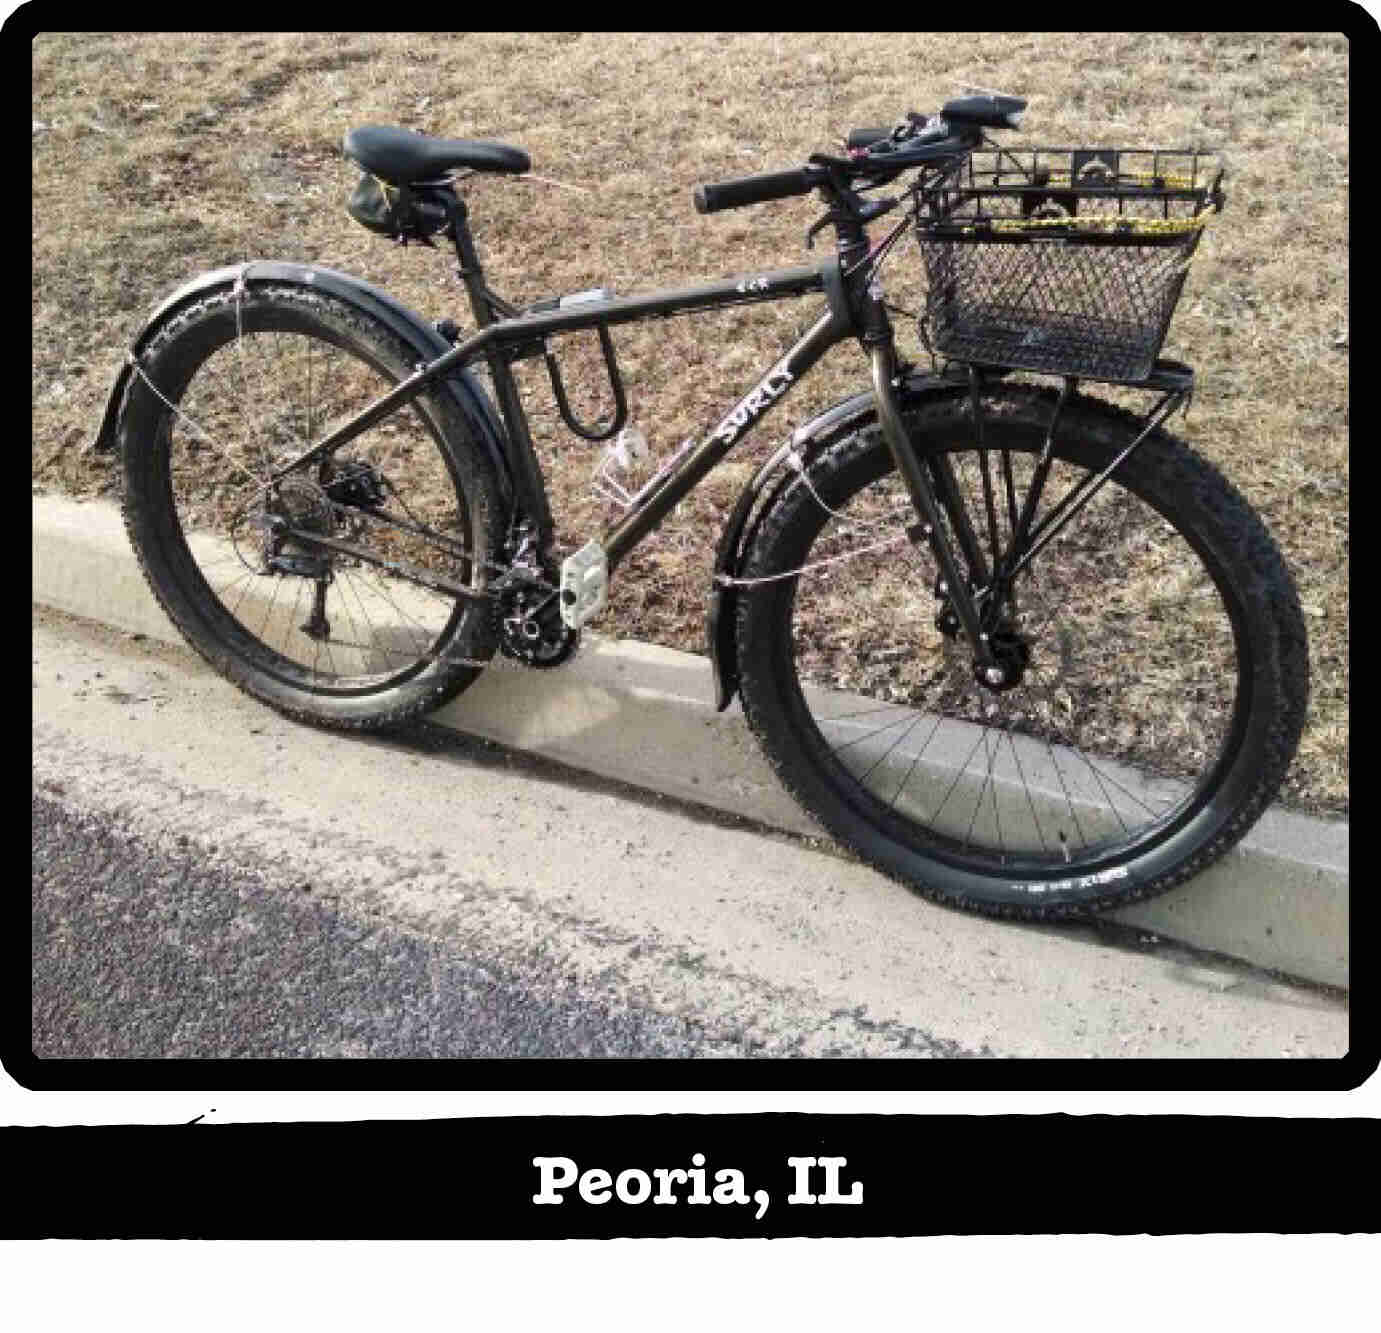 Right side view of a Surly ECR bike next to a curb - Peoria, IL tag below image